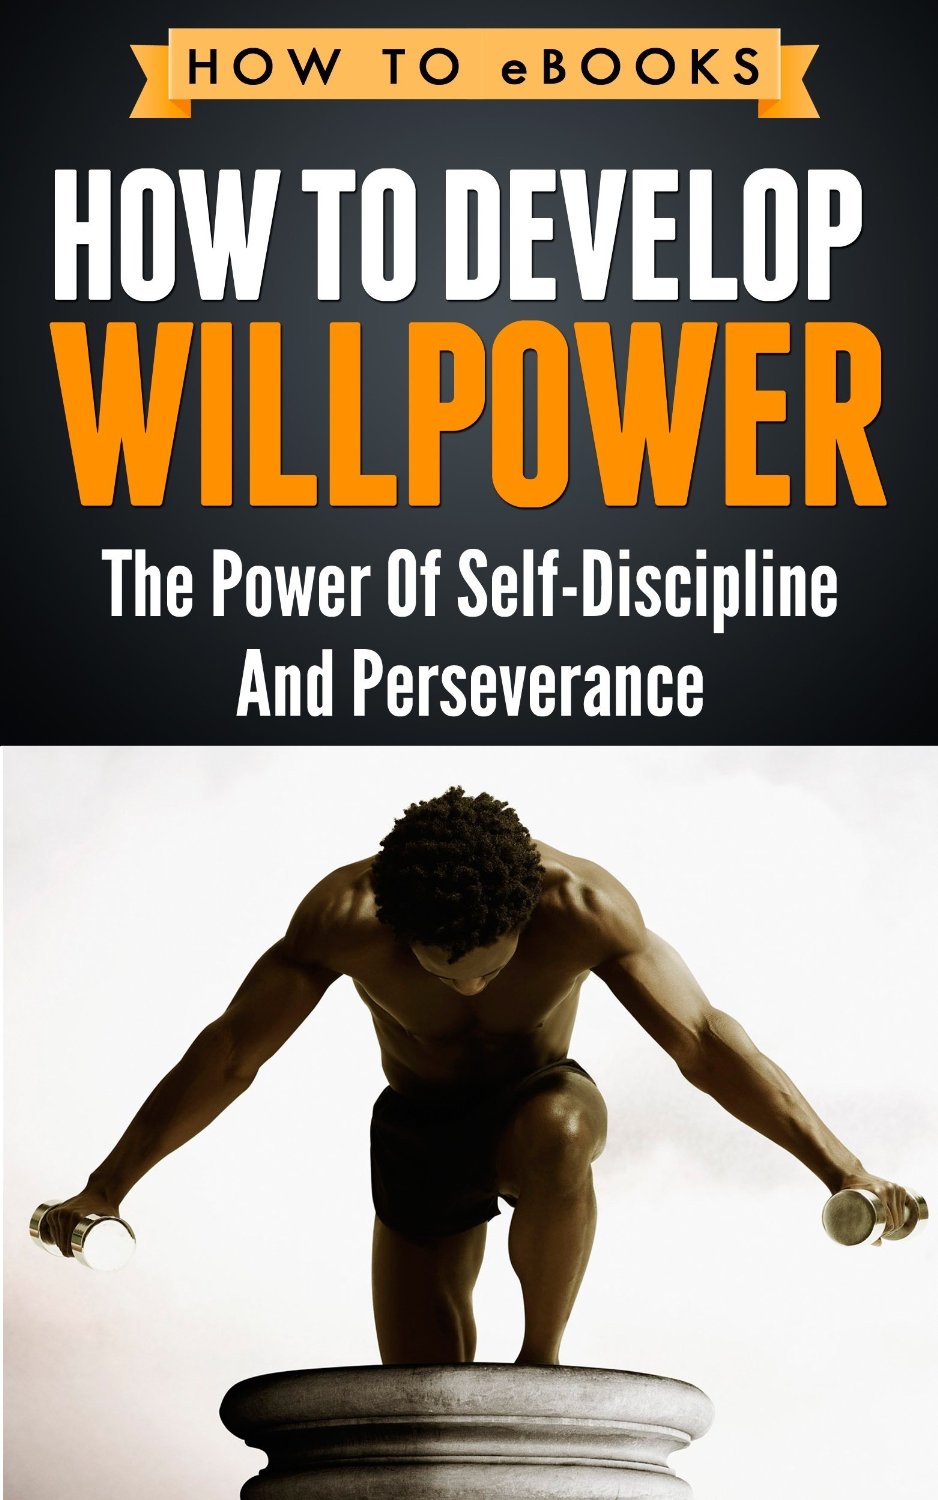 How To Develop Willpower – The Power Of Self-Discipline And Perseverance by How To eBooks